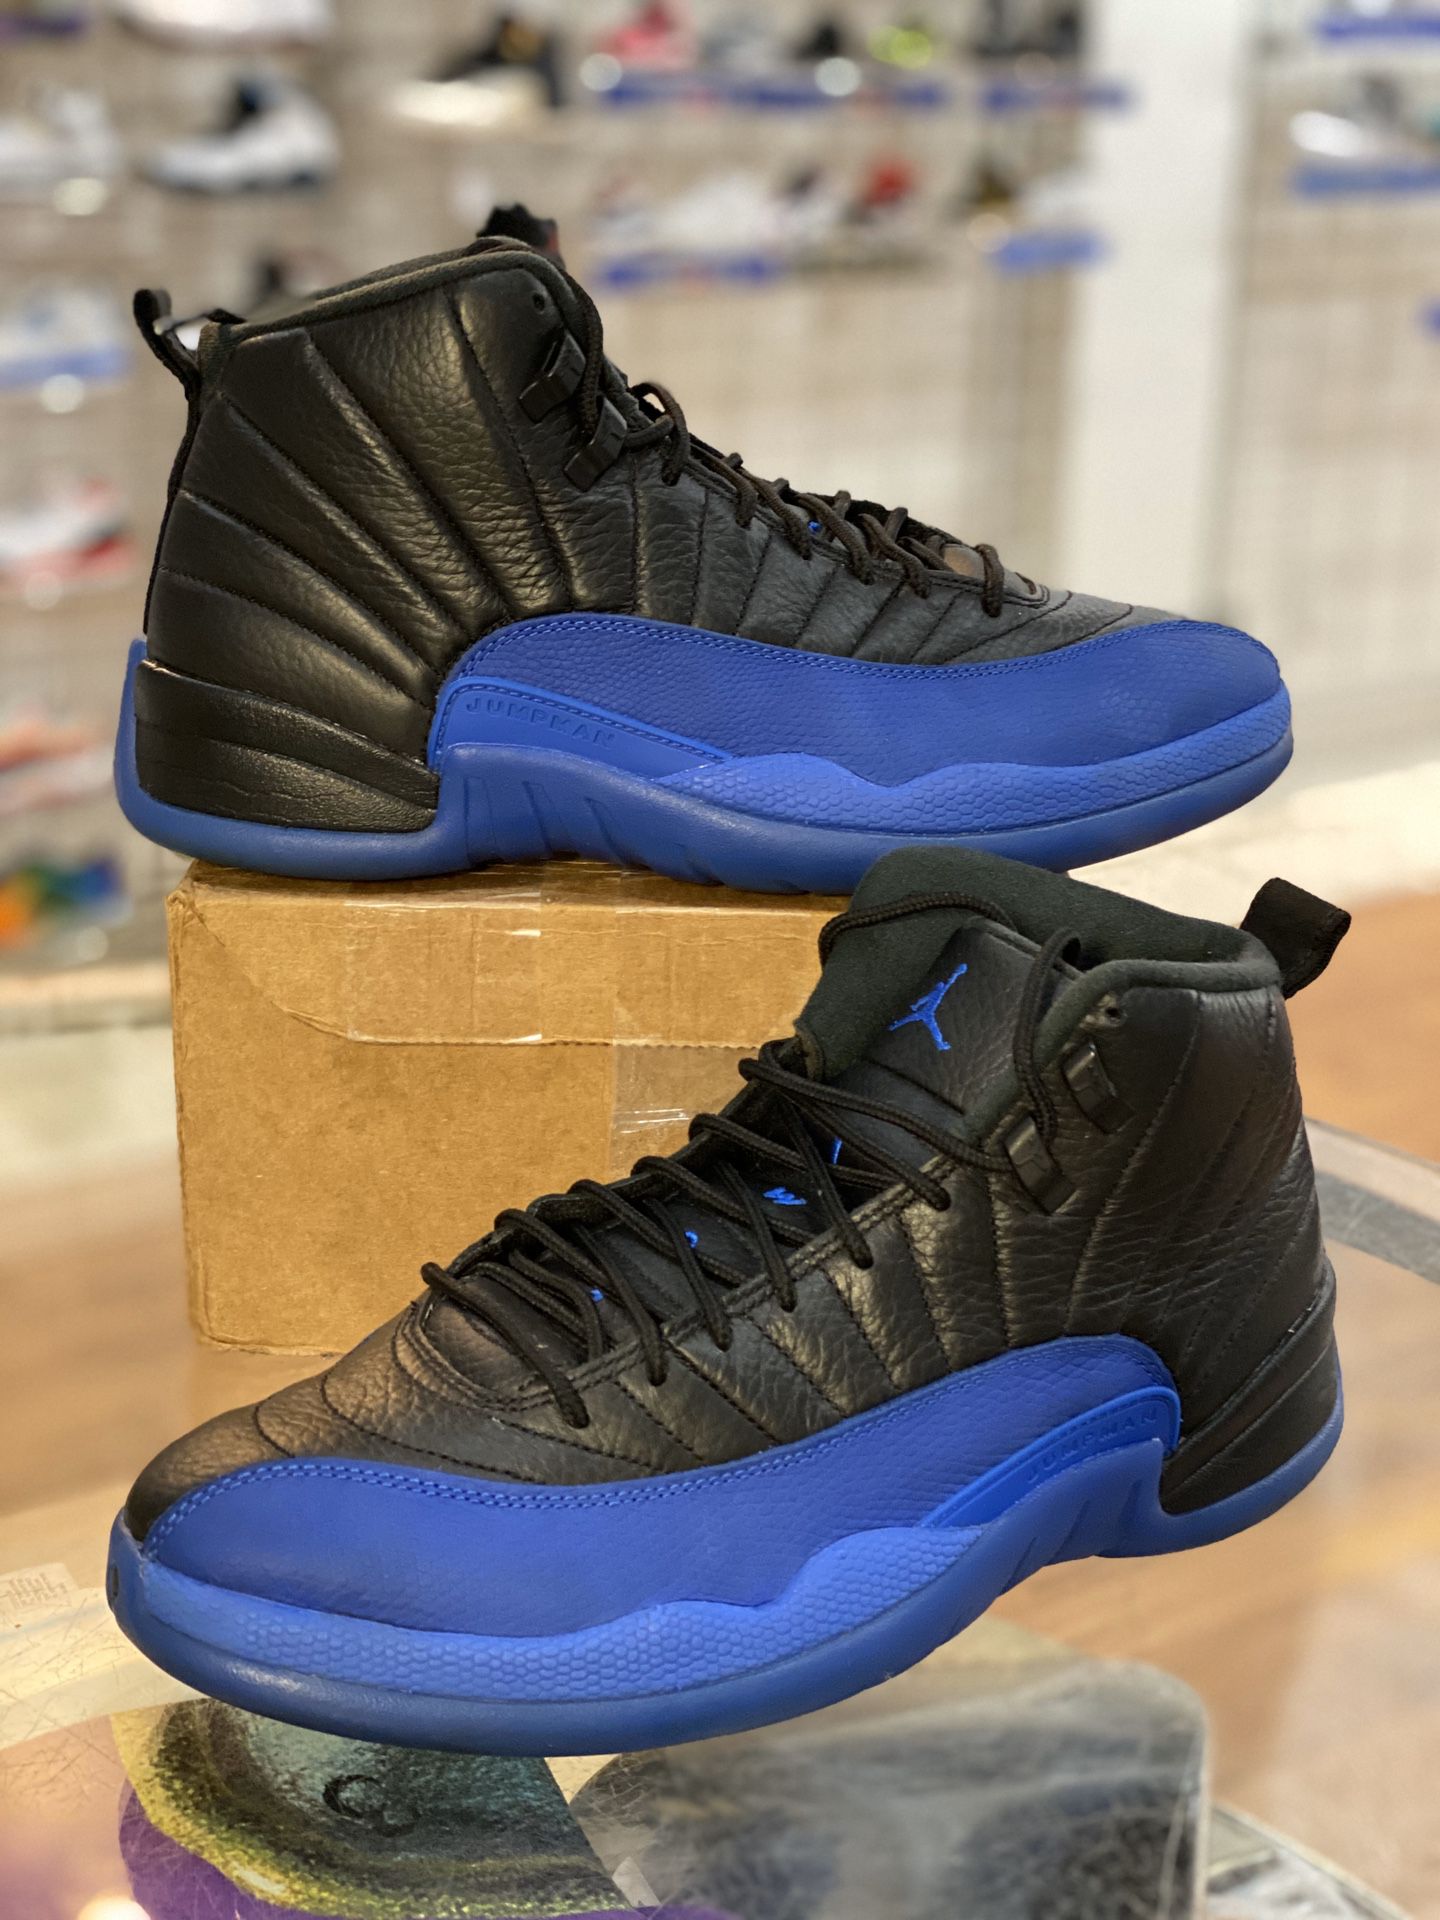 Game royal 12s size 10.5